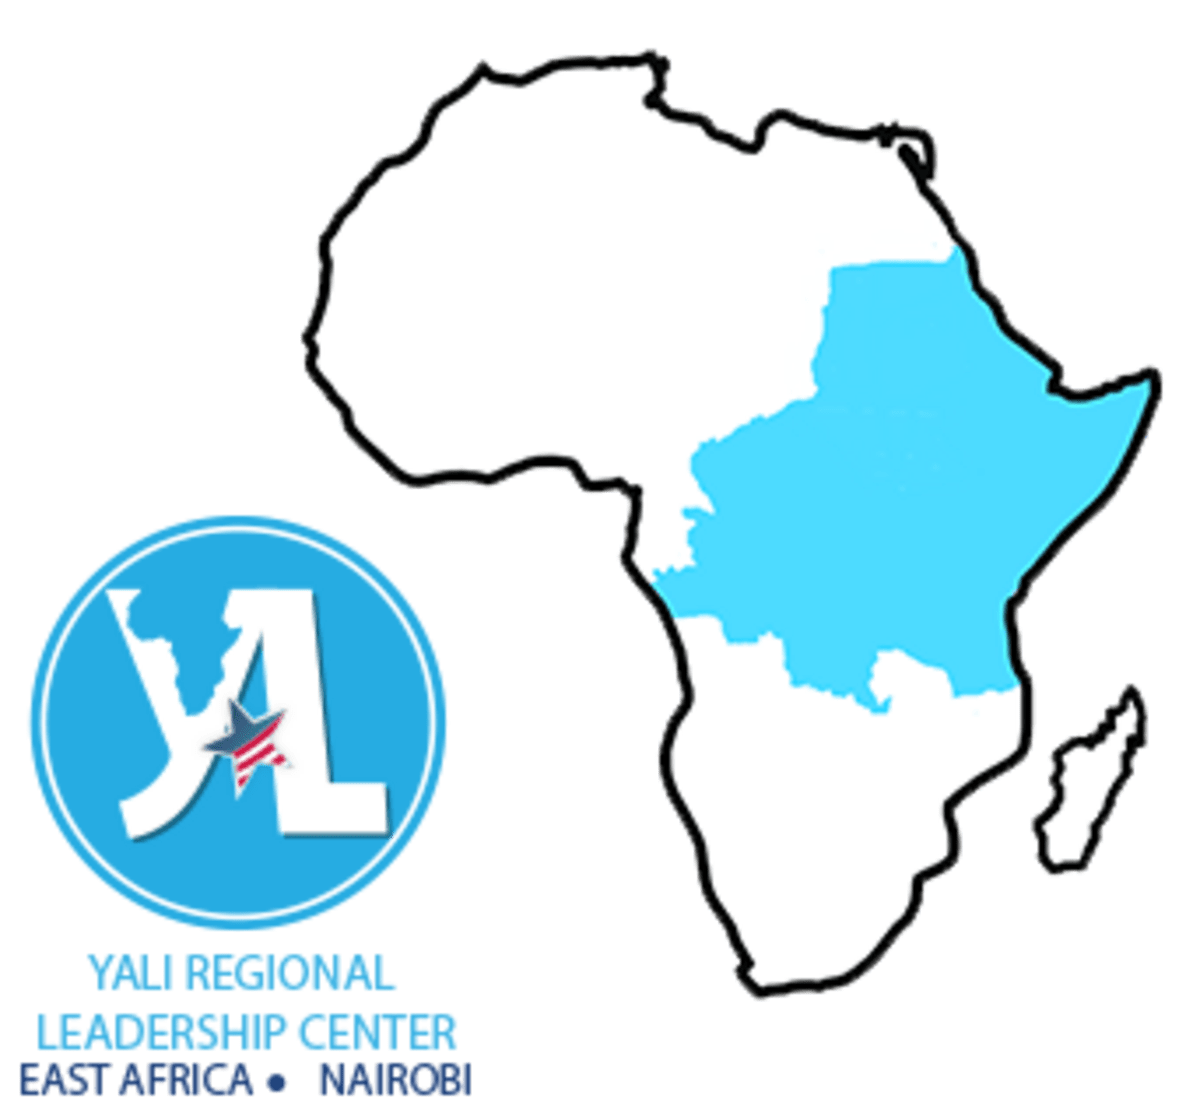 Call for Applications: YALI Regional Leadership Center East Africa Transformation Fund Grant